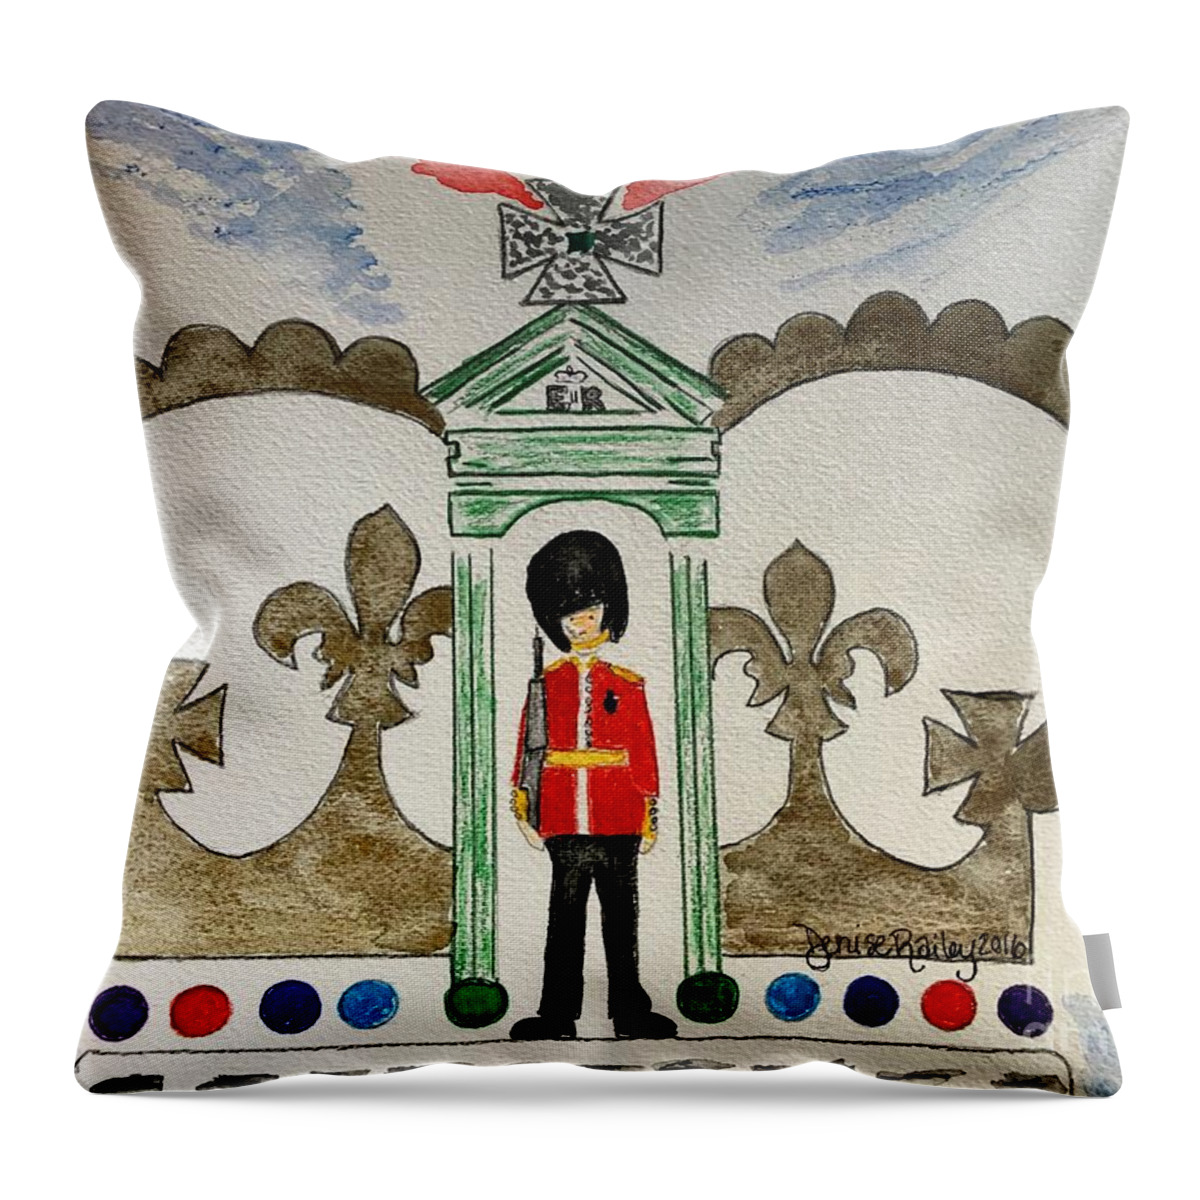 United Kingdom Throw Pillow featuring the painting Unity by Denise Railey